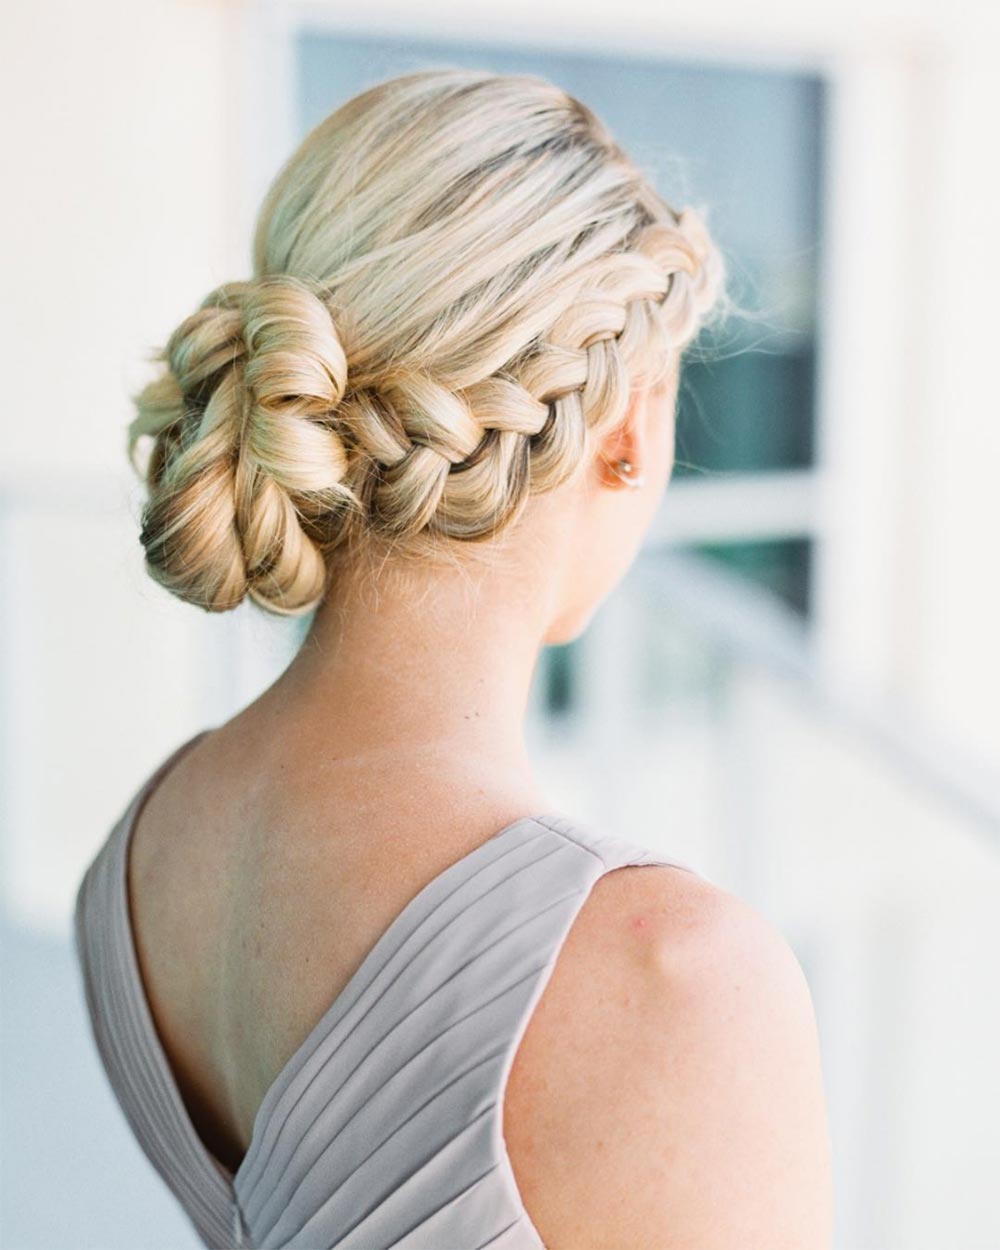 81 Beautiful Updos for Long-Haired Brides | ทรงผมไปงาน, ผมสั้น